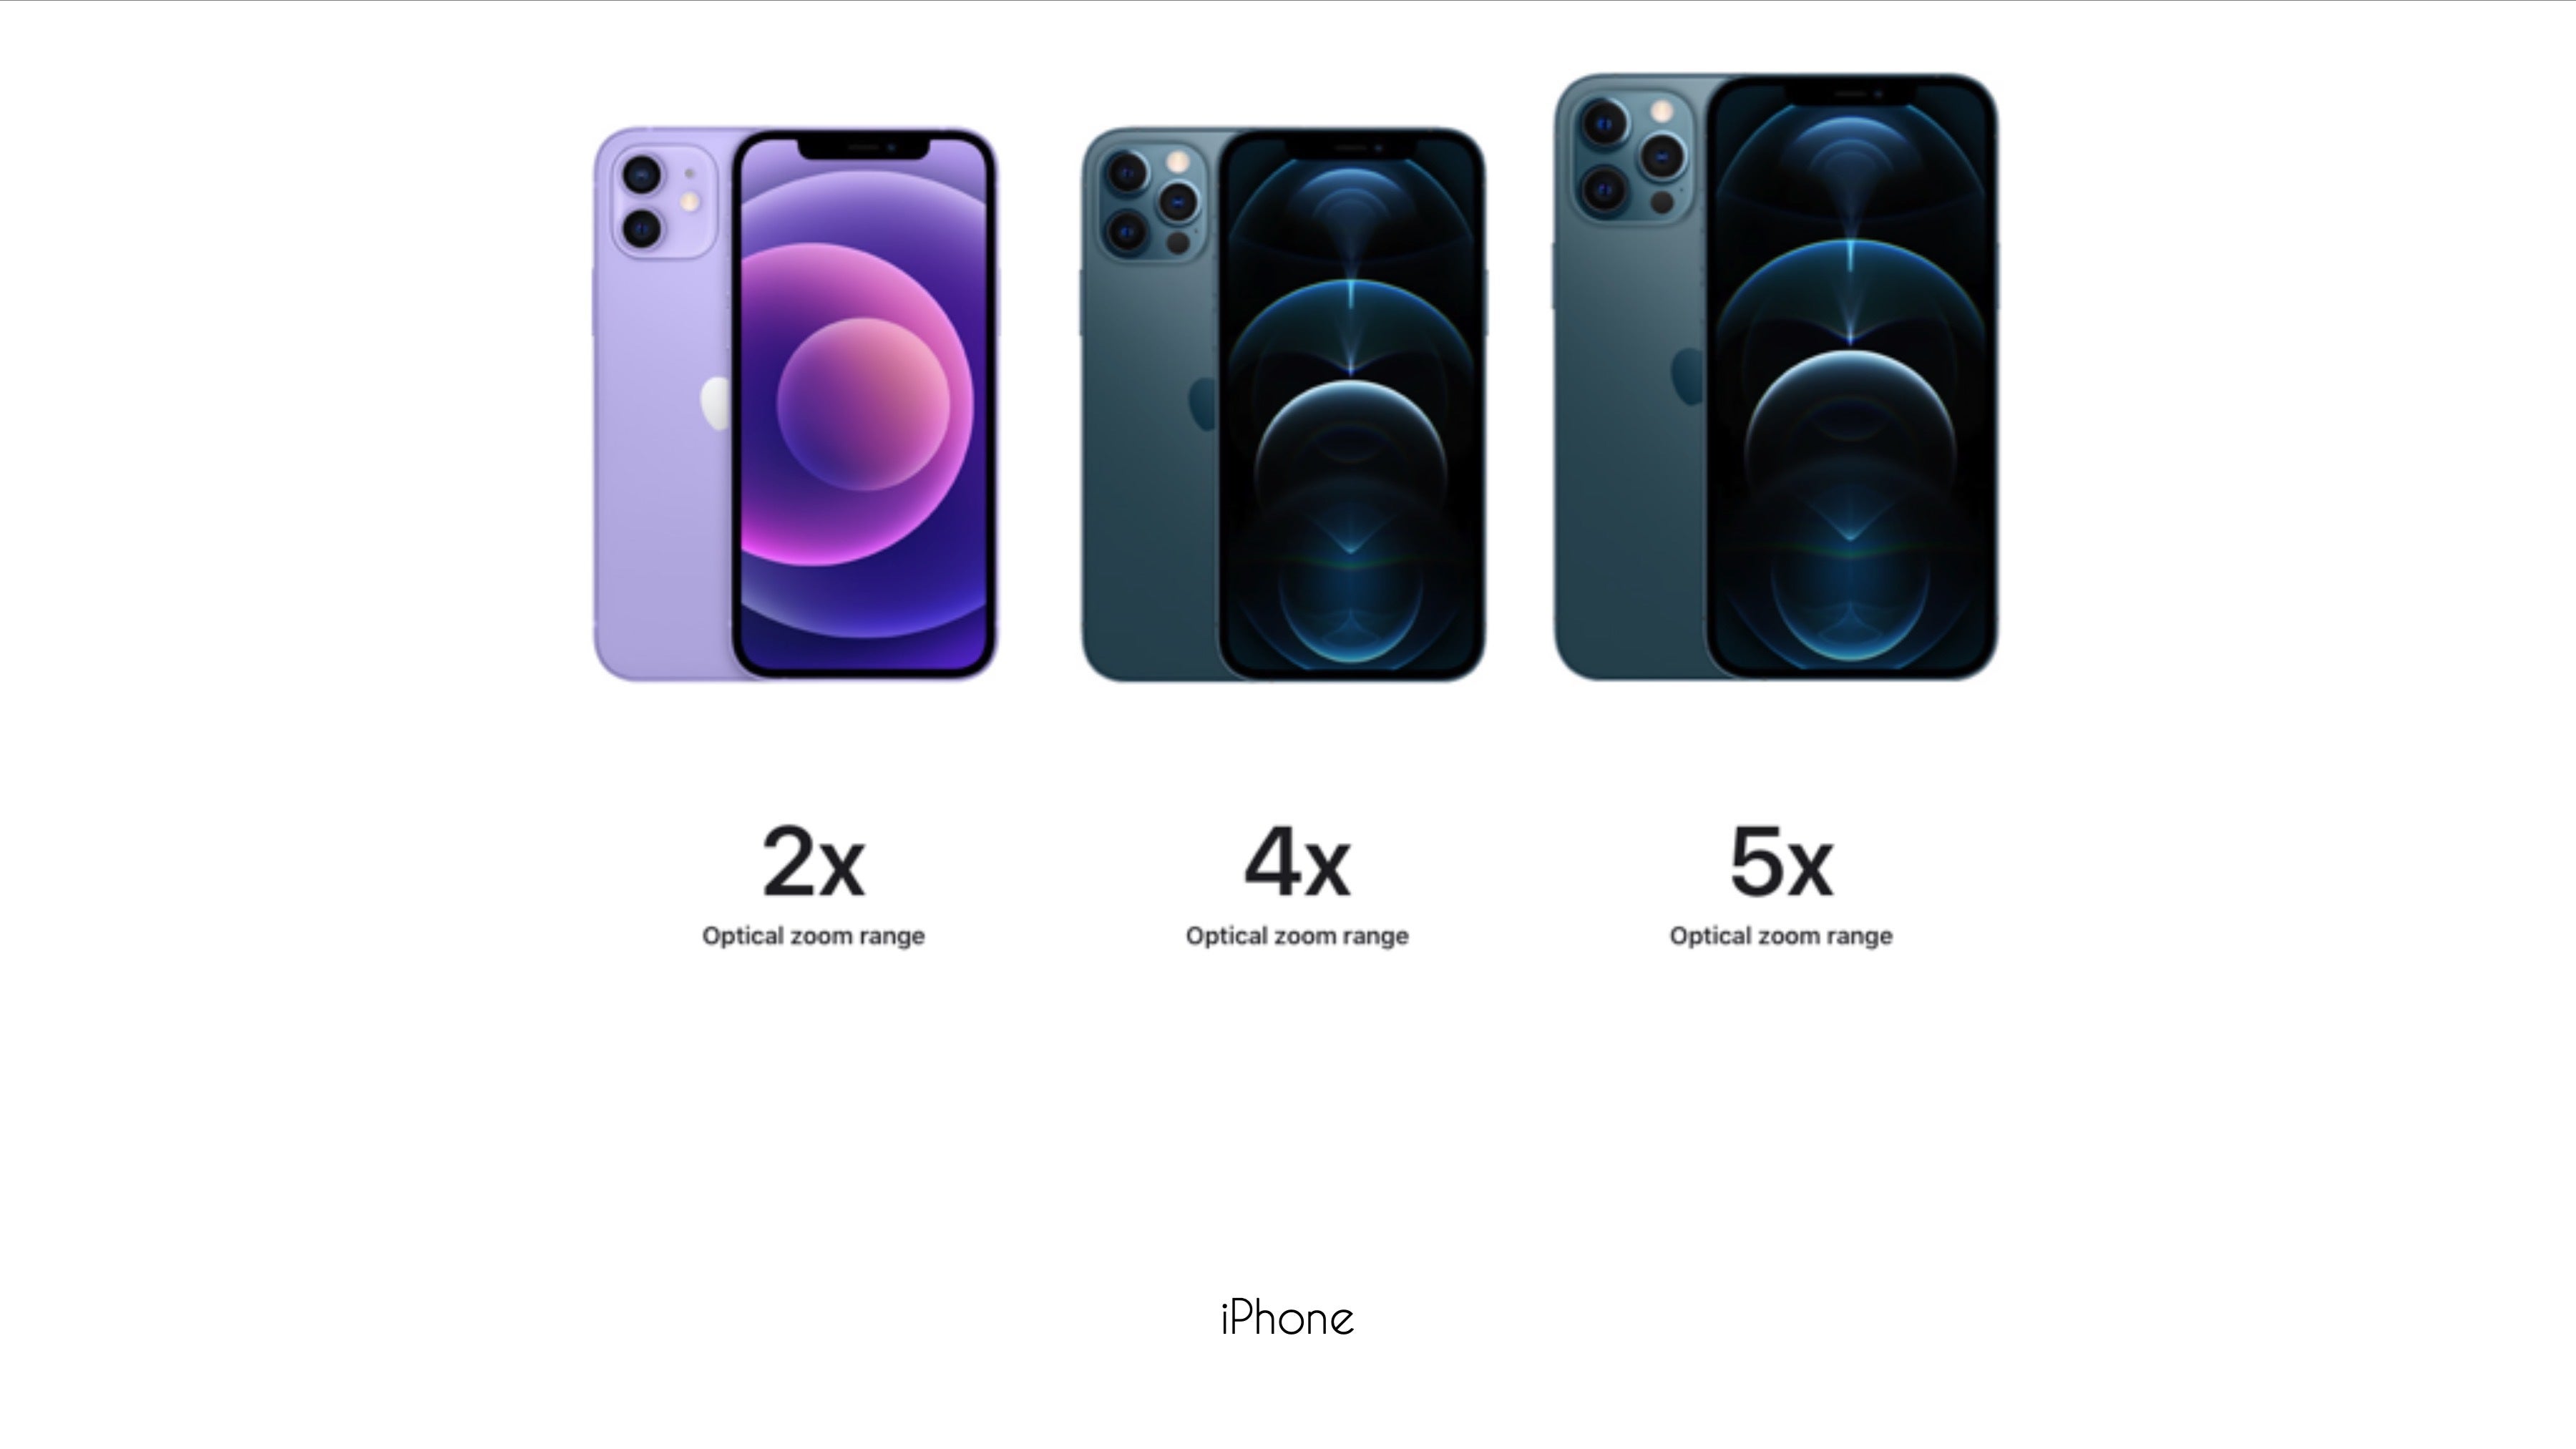 Apple&#039;s &quot;Compare iPhone models&quot; page might be a bit... misleading. - iPhone 13 Pro Max with &quot;5x optical zoom range&quot;: Prepare for Apple&#039;s September 14 math exam